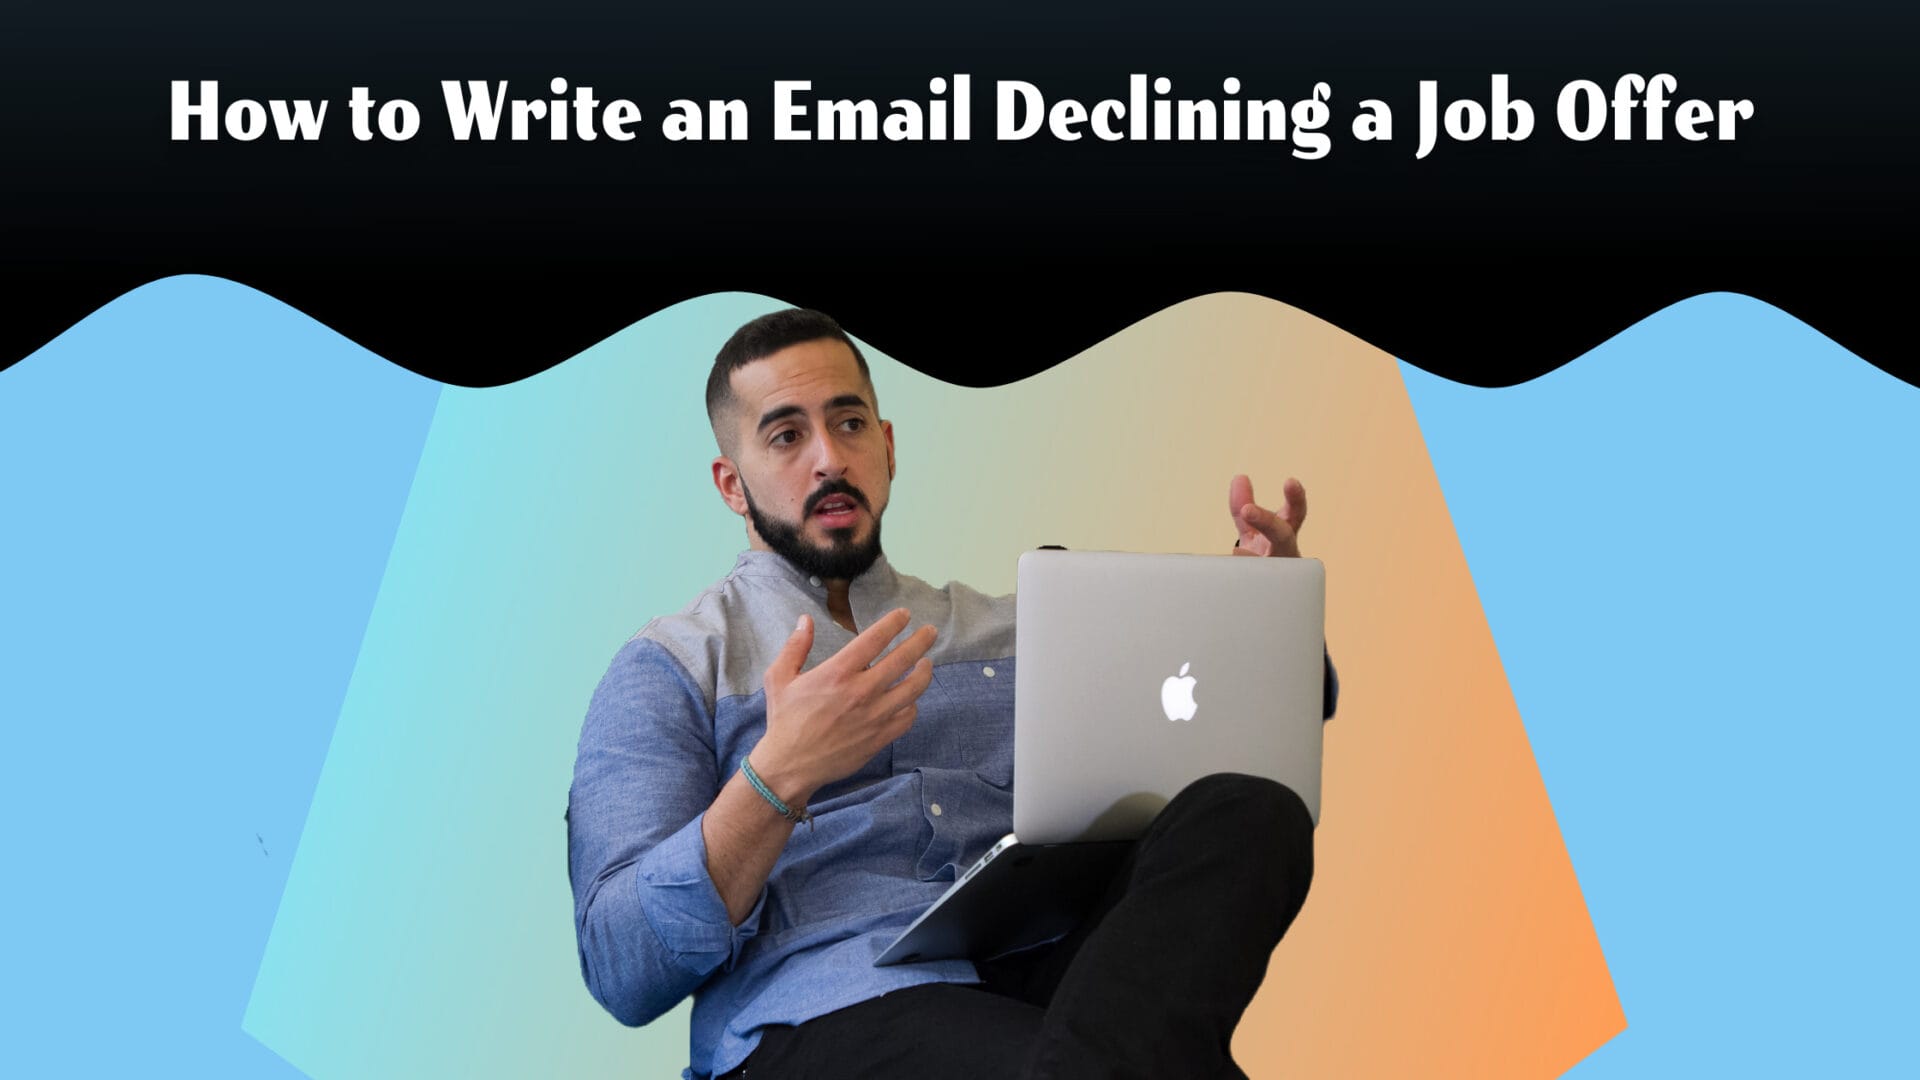 The title says: How to write an email declining a job offer. Picture of a man on a laptop in conversation. Colorful background.